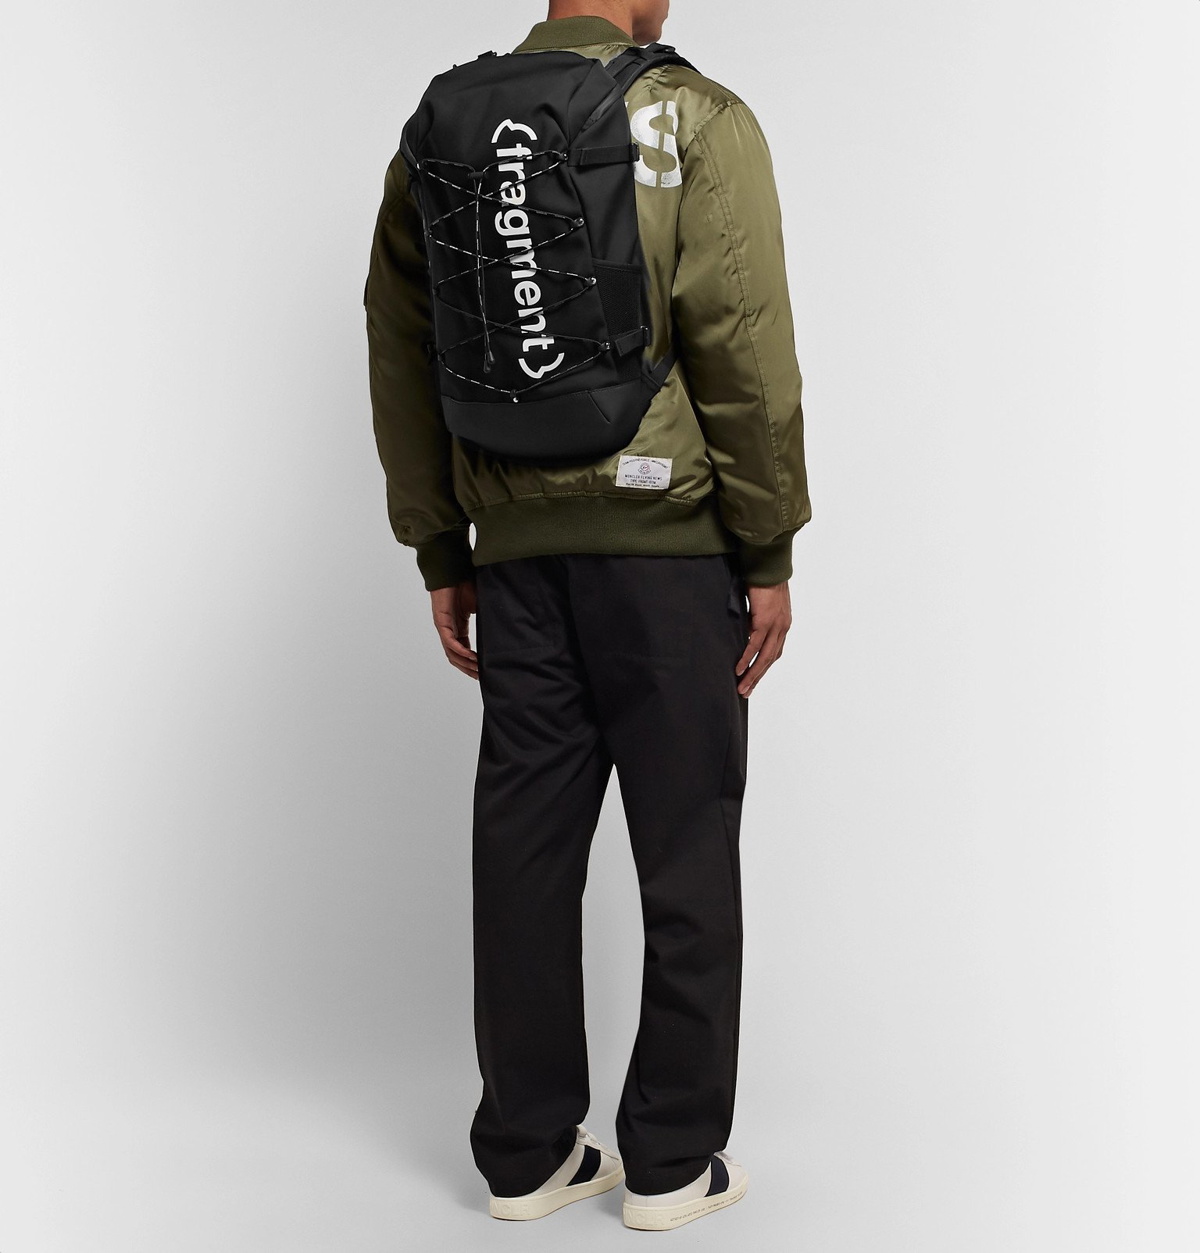 Moncler Genius - 7 Moncler Fragment Printed Shell and Neoprene